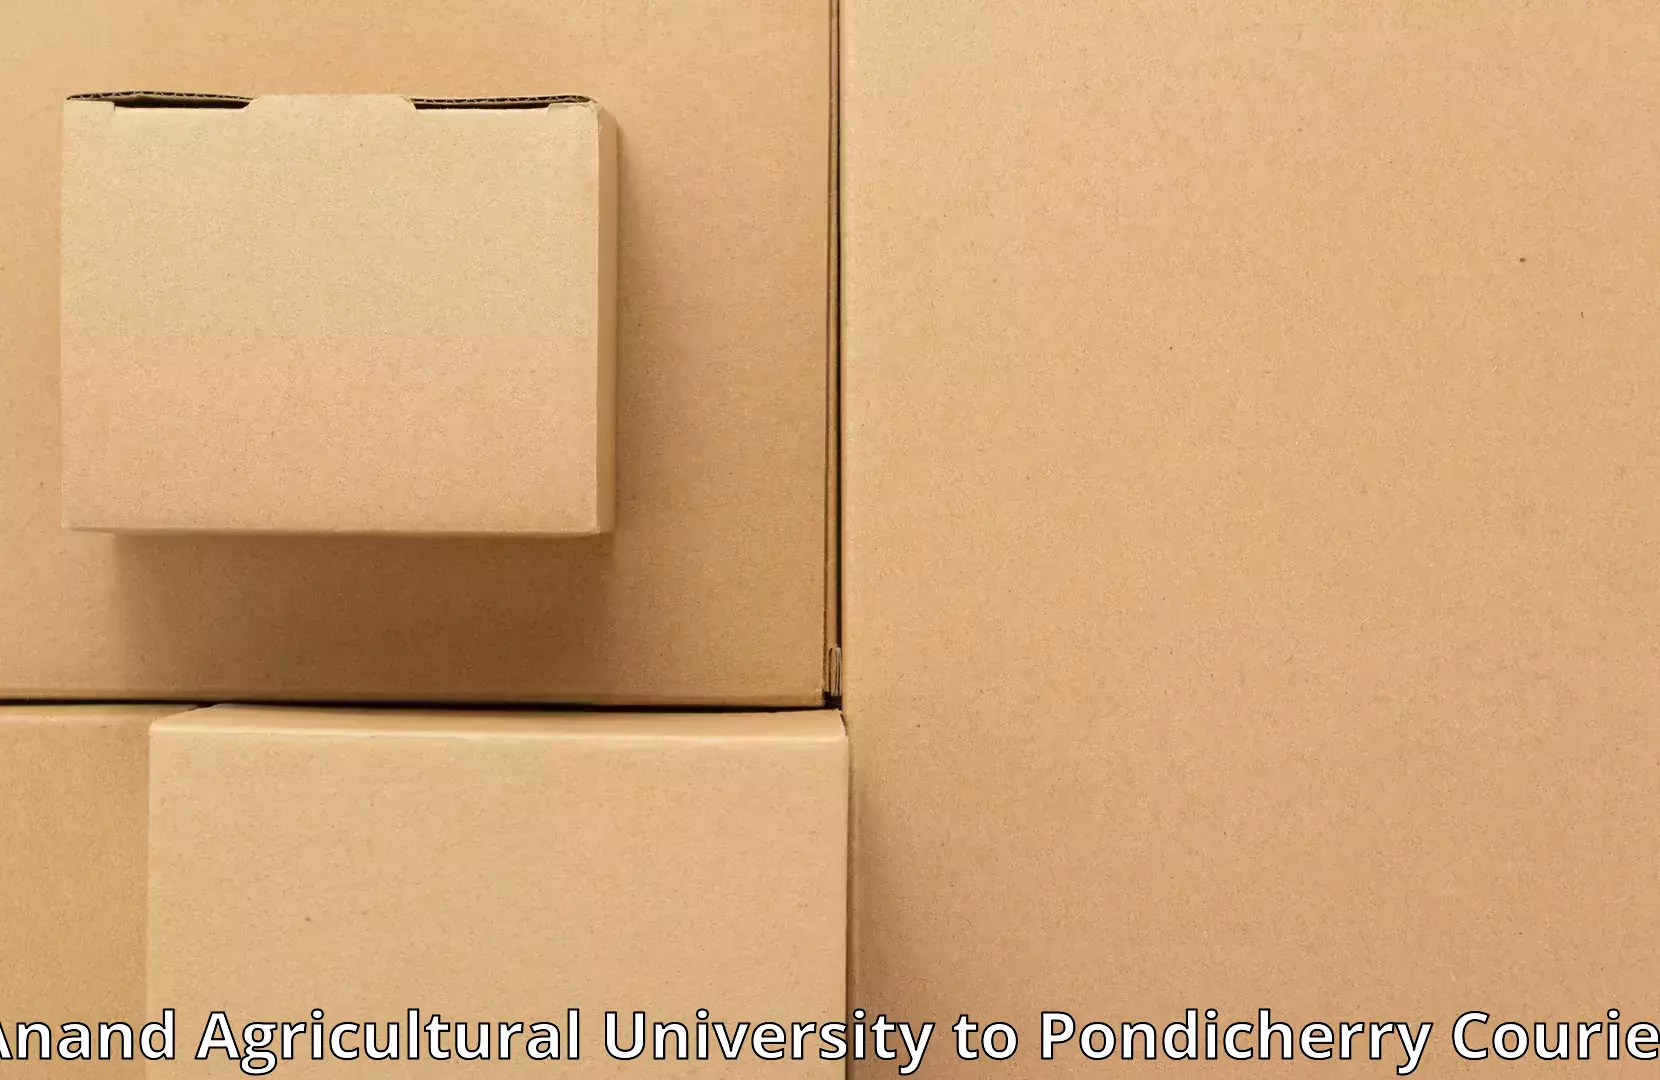 Trusted furniture transport Anand Agricultural University to Pondicherry University